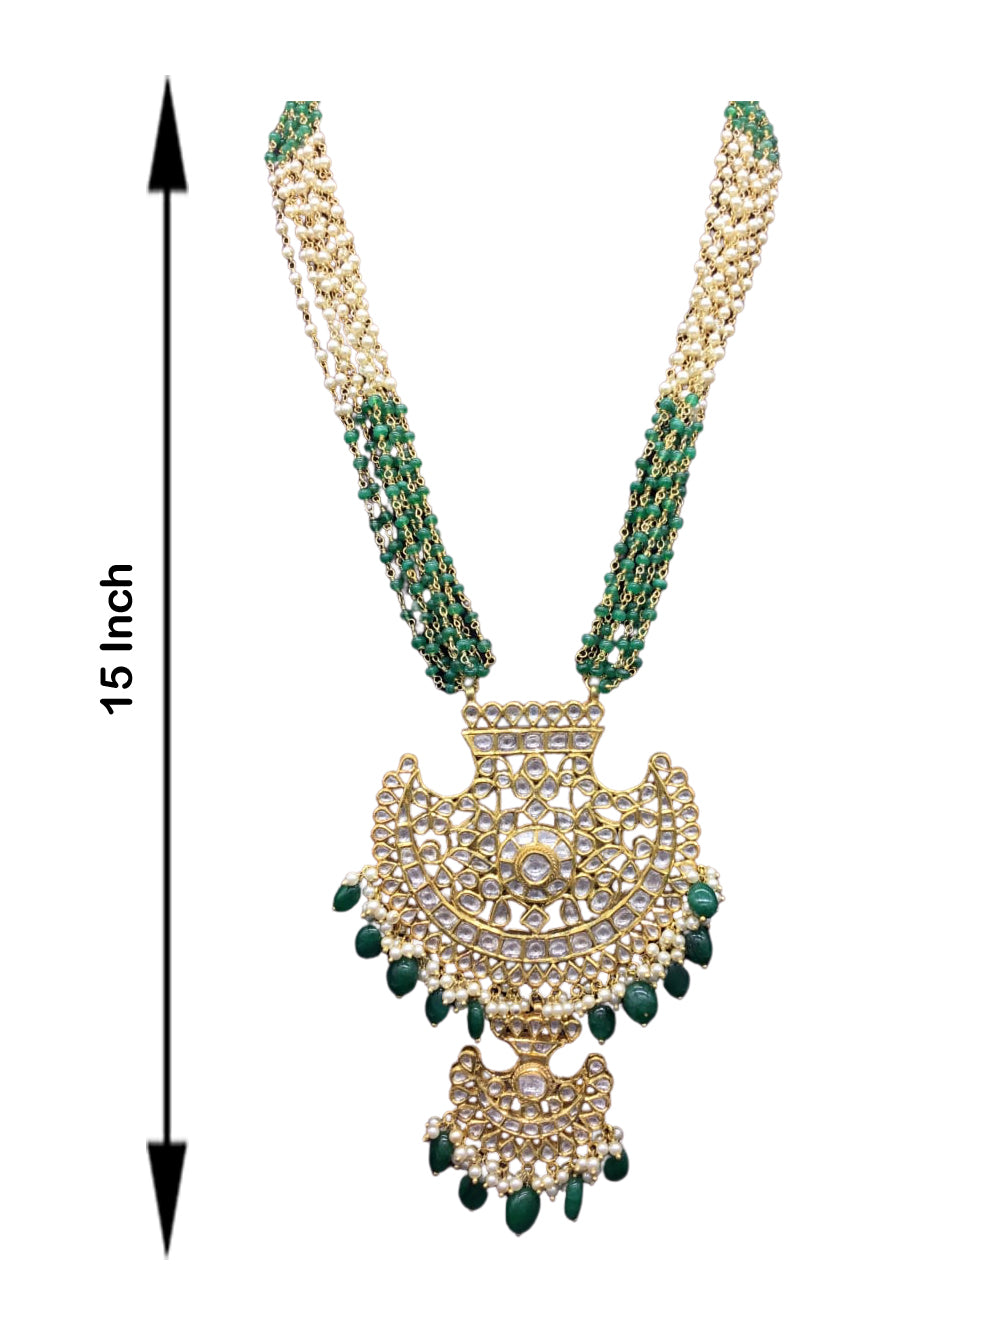 18k Gold and Diamond Polki Pankhi (fan) Pendant Set with beryl and pearl chains